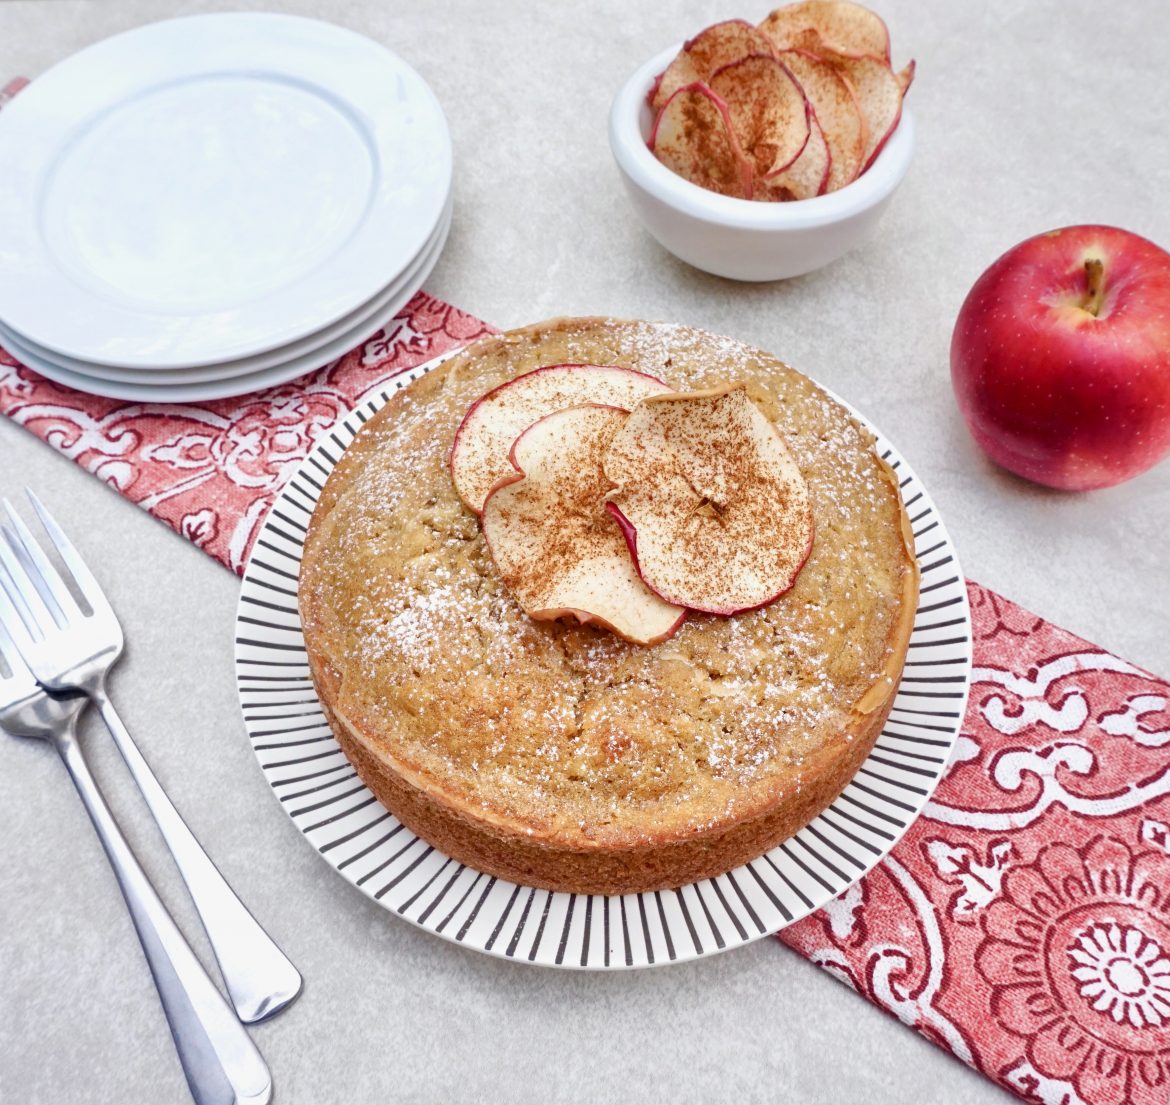 All Things Apple: 20 Simple Fall Recipes